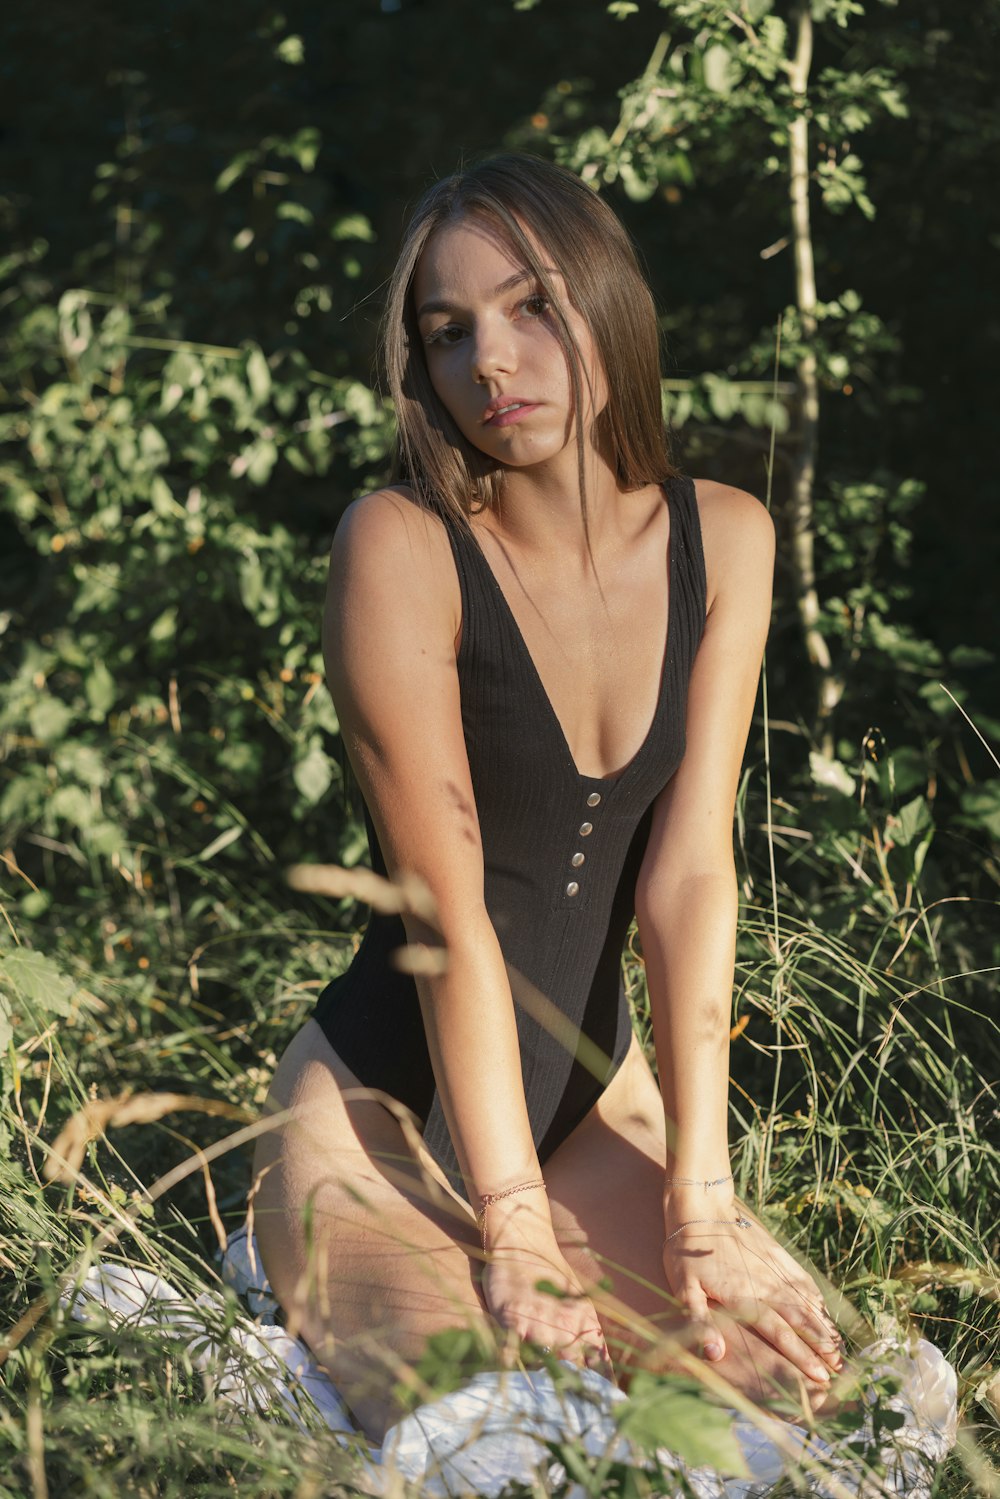 a woman in a bathing suit sitting in the grass